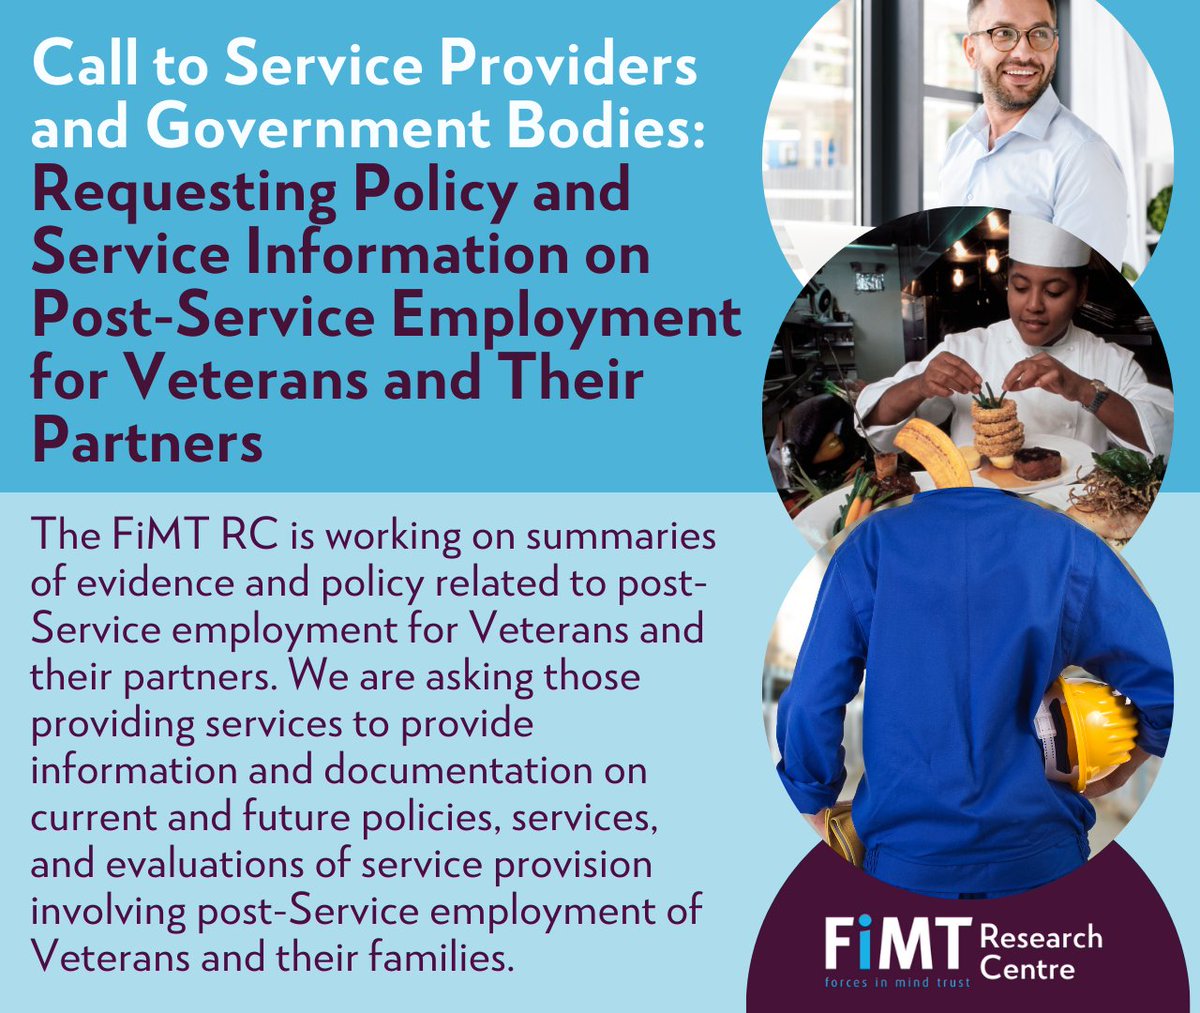 Last call to contribute to our upcoming summaries of knowledge, policy and service provision around Post-Service #employment for UK #Veterans and their families. Send your related info and documentation to team@fimt-rc.org with the subject 'Employment Policy' by 30.04.2024